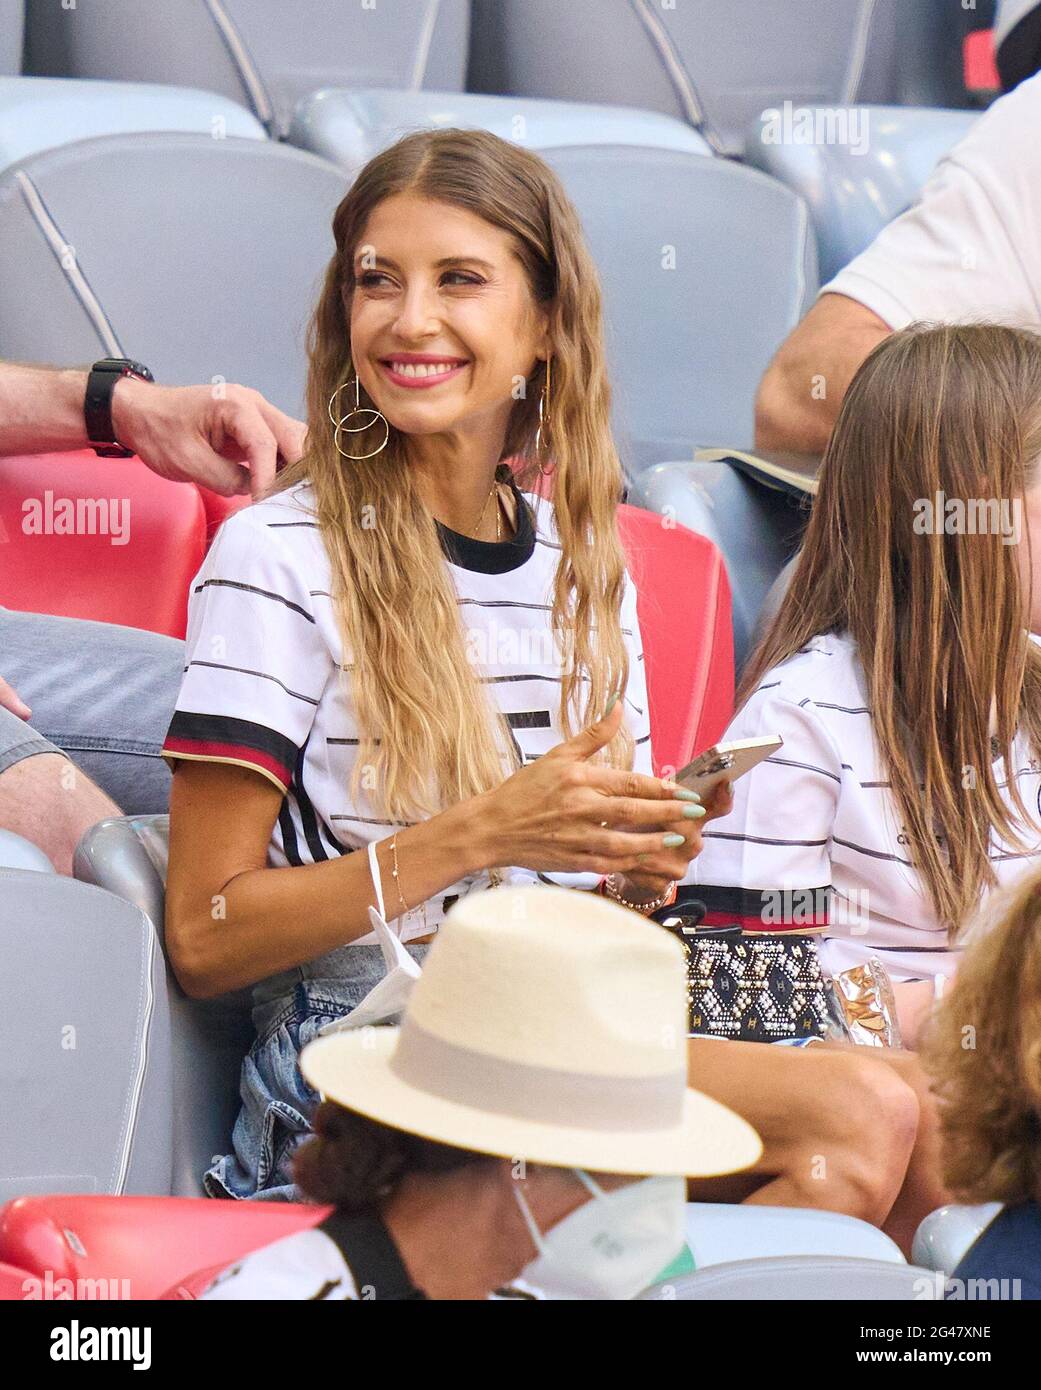 Cathy Fischer, wife of  Mats Hummels, in the Group F match PORTUGAL - GERMANY  at the football UEFA European Championships 2020 in Season 2020/2021 on June 19, 2021  in Munich, Germany. © Peter Schatz / Alamy Live News Stock Photo